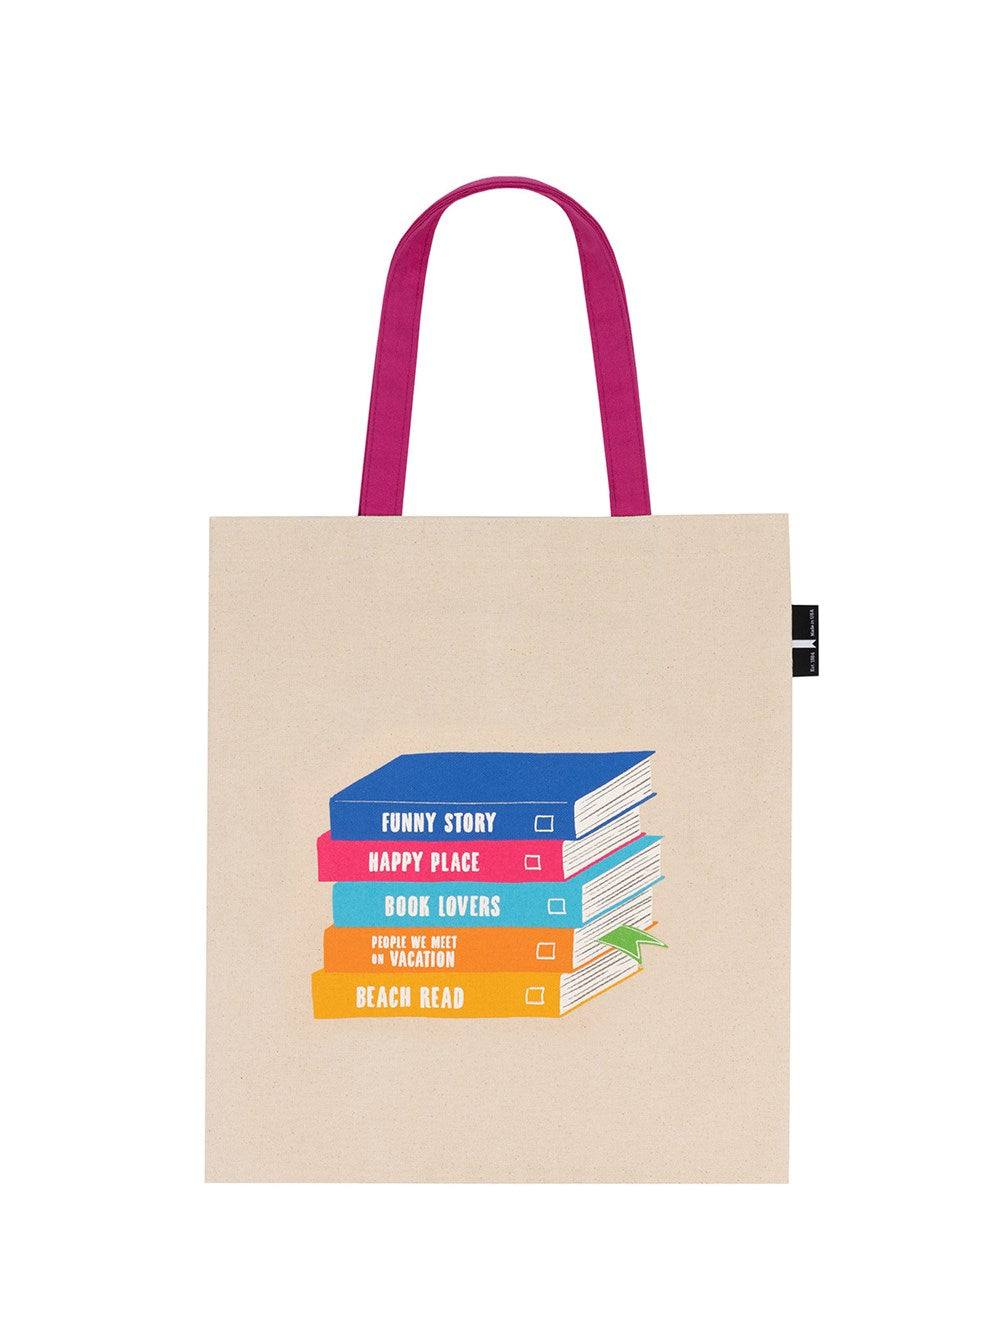 Emily Henry: Happy Place Tote Bag